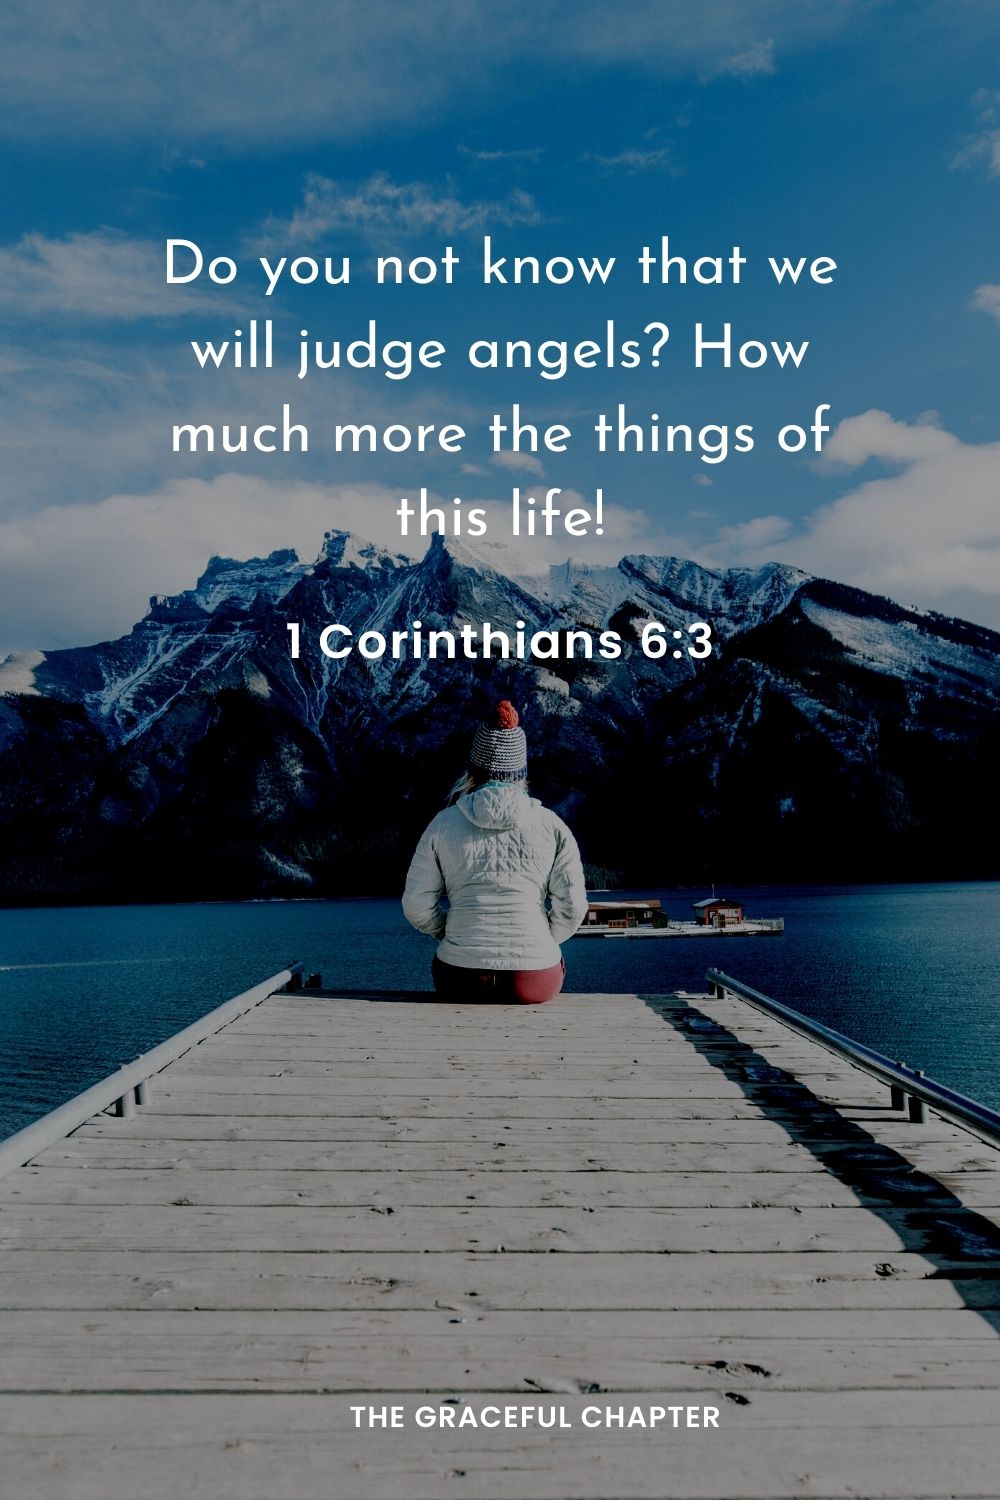 Do you not know that we will judge angels? How much more the things of this life!